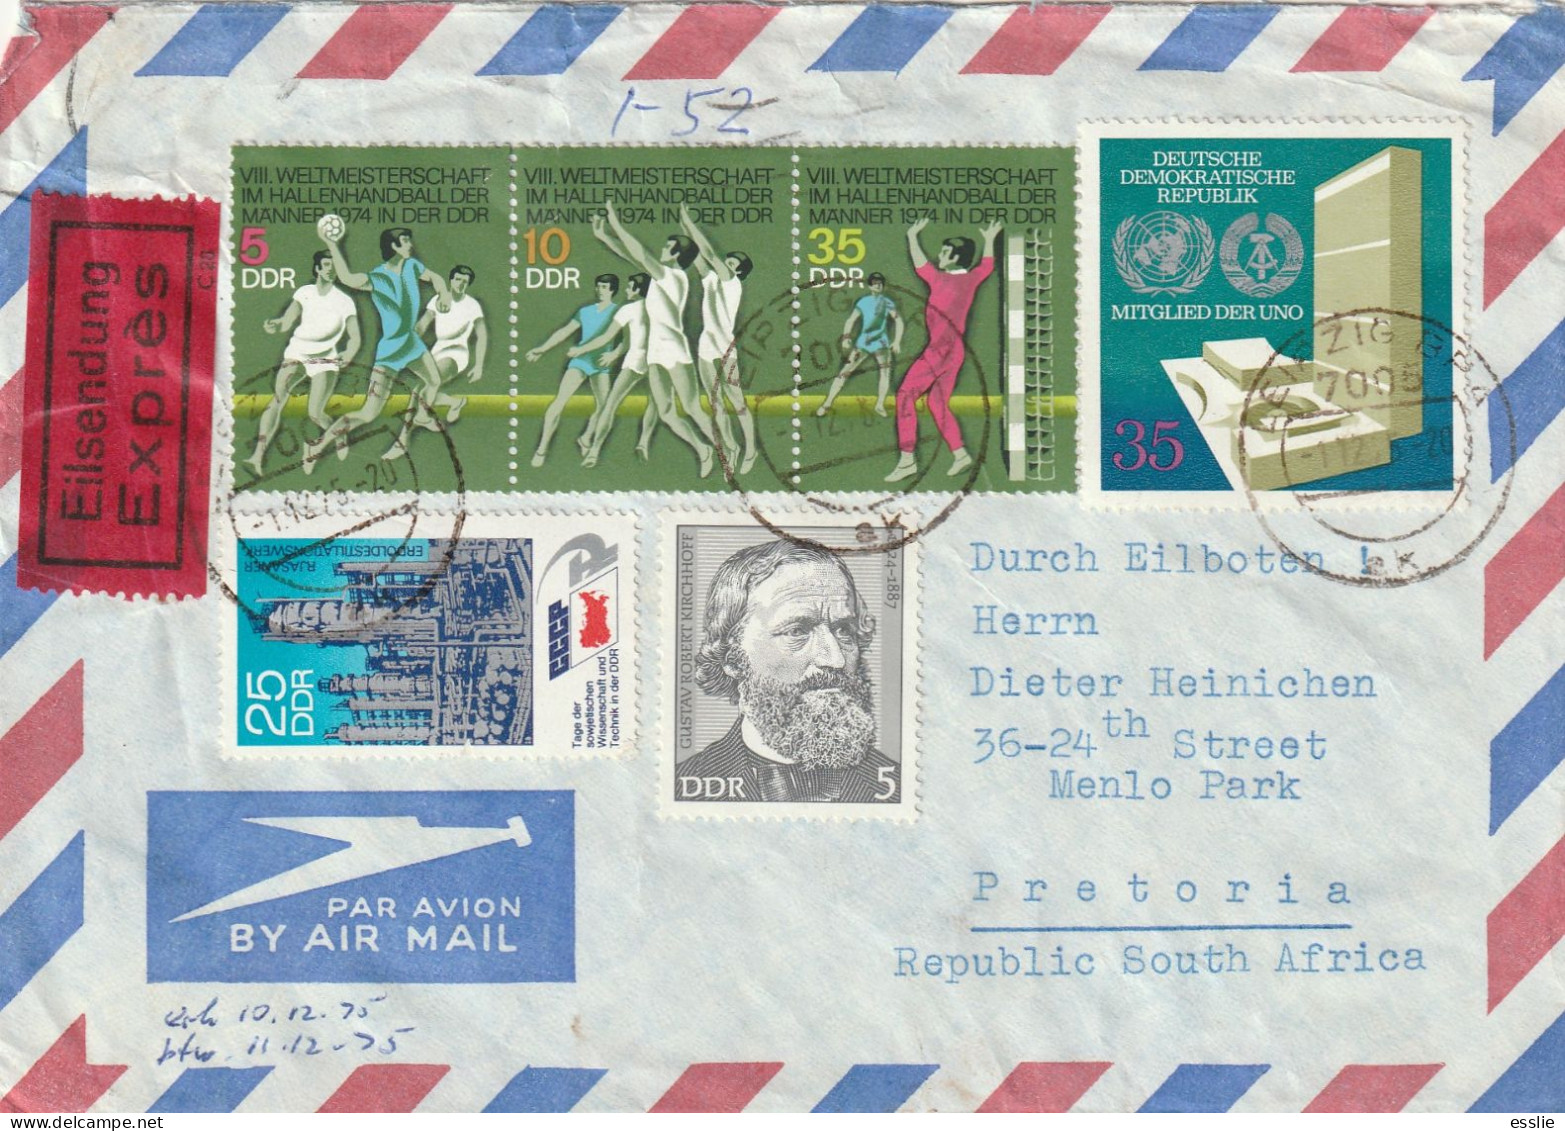 Germany DDR Eilsendung Express Cover - 1974 1973 - Kirchhoff Fieldball United Nations Oil Refinery Ryazan Soviet Science - Covers & Documents